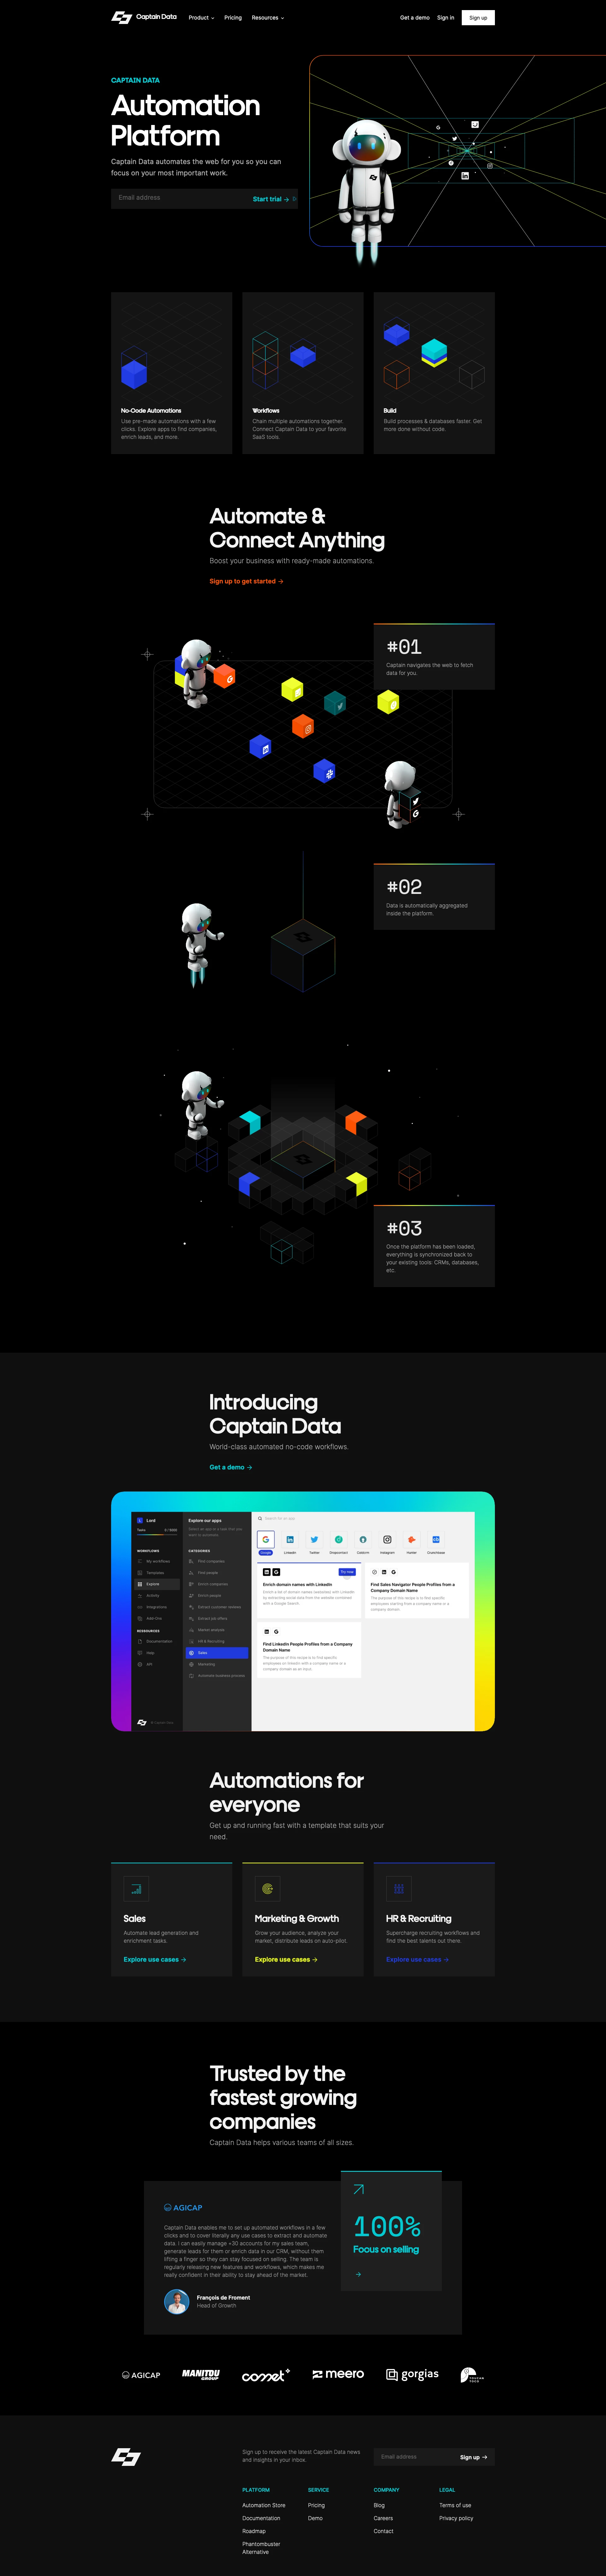 Captain Data Landing Page Example: Captain Data automates the web for you so you can focus on your most important work.